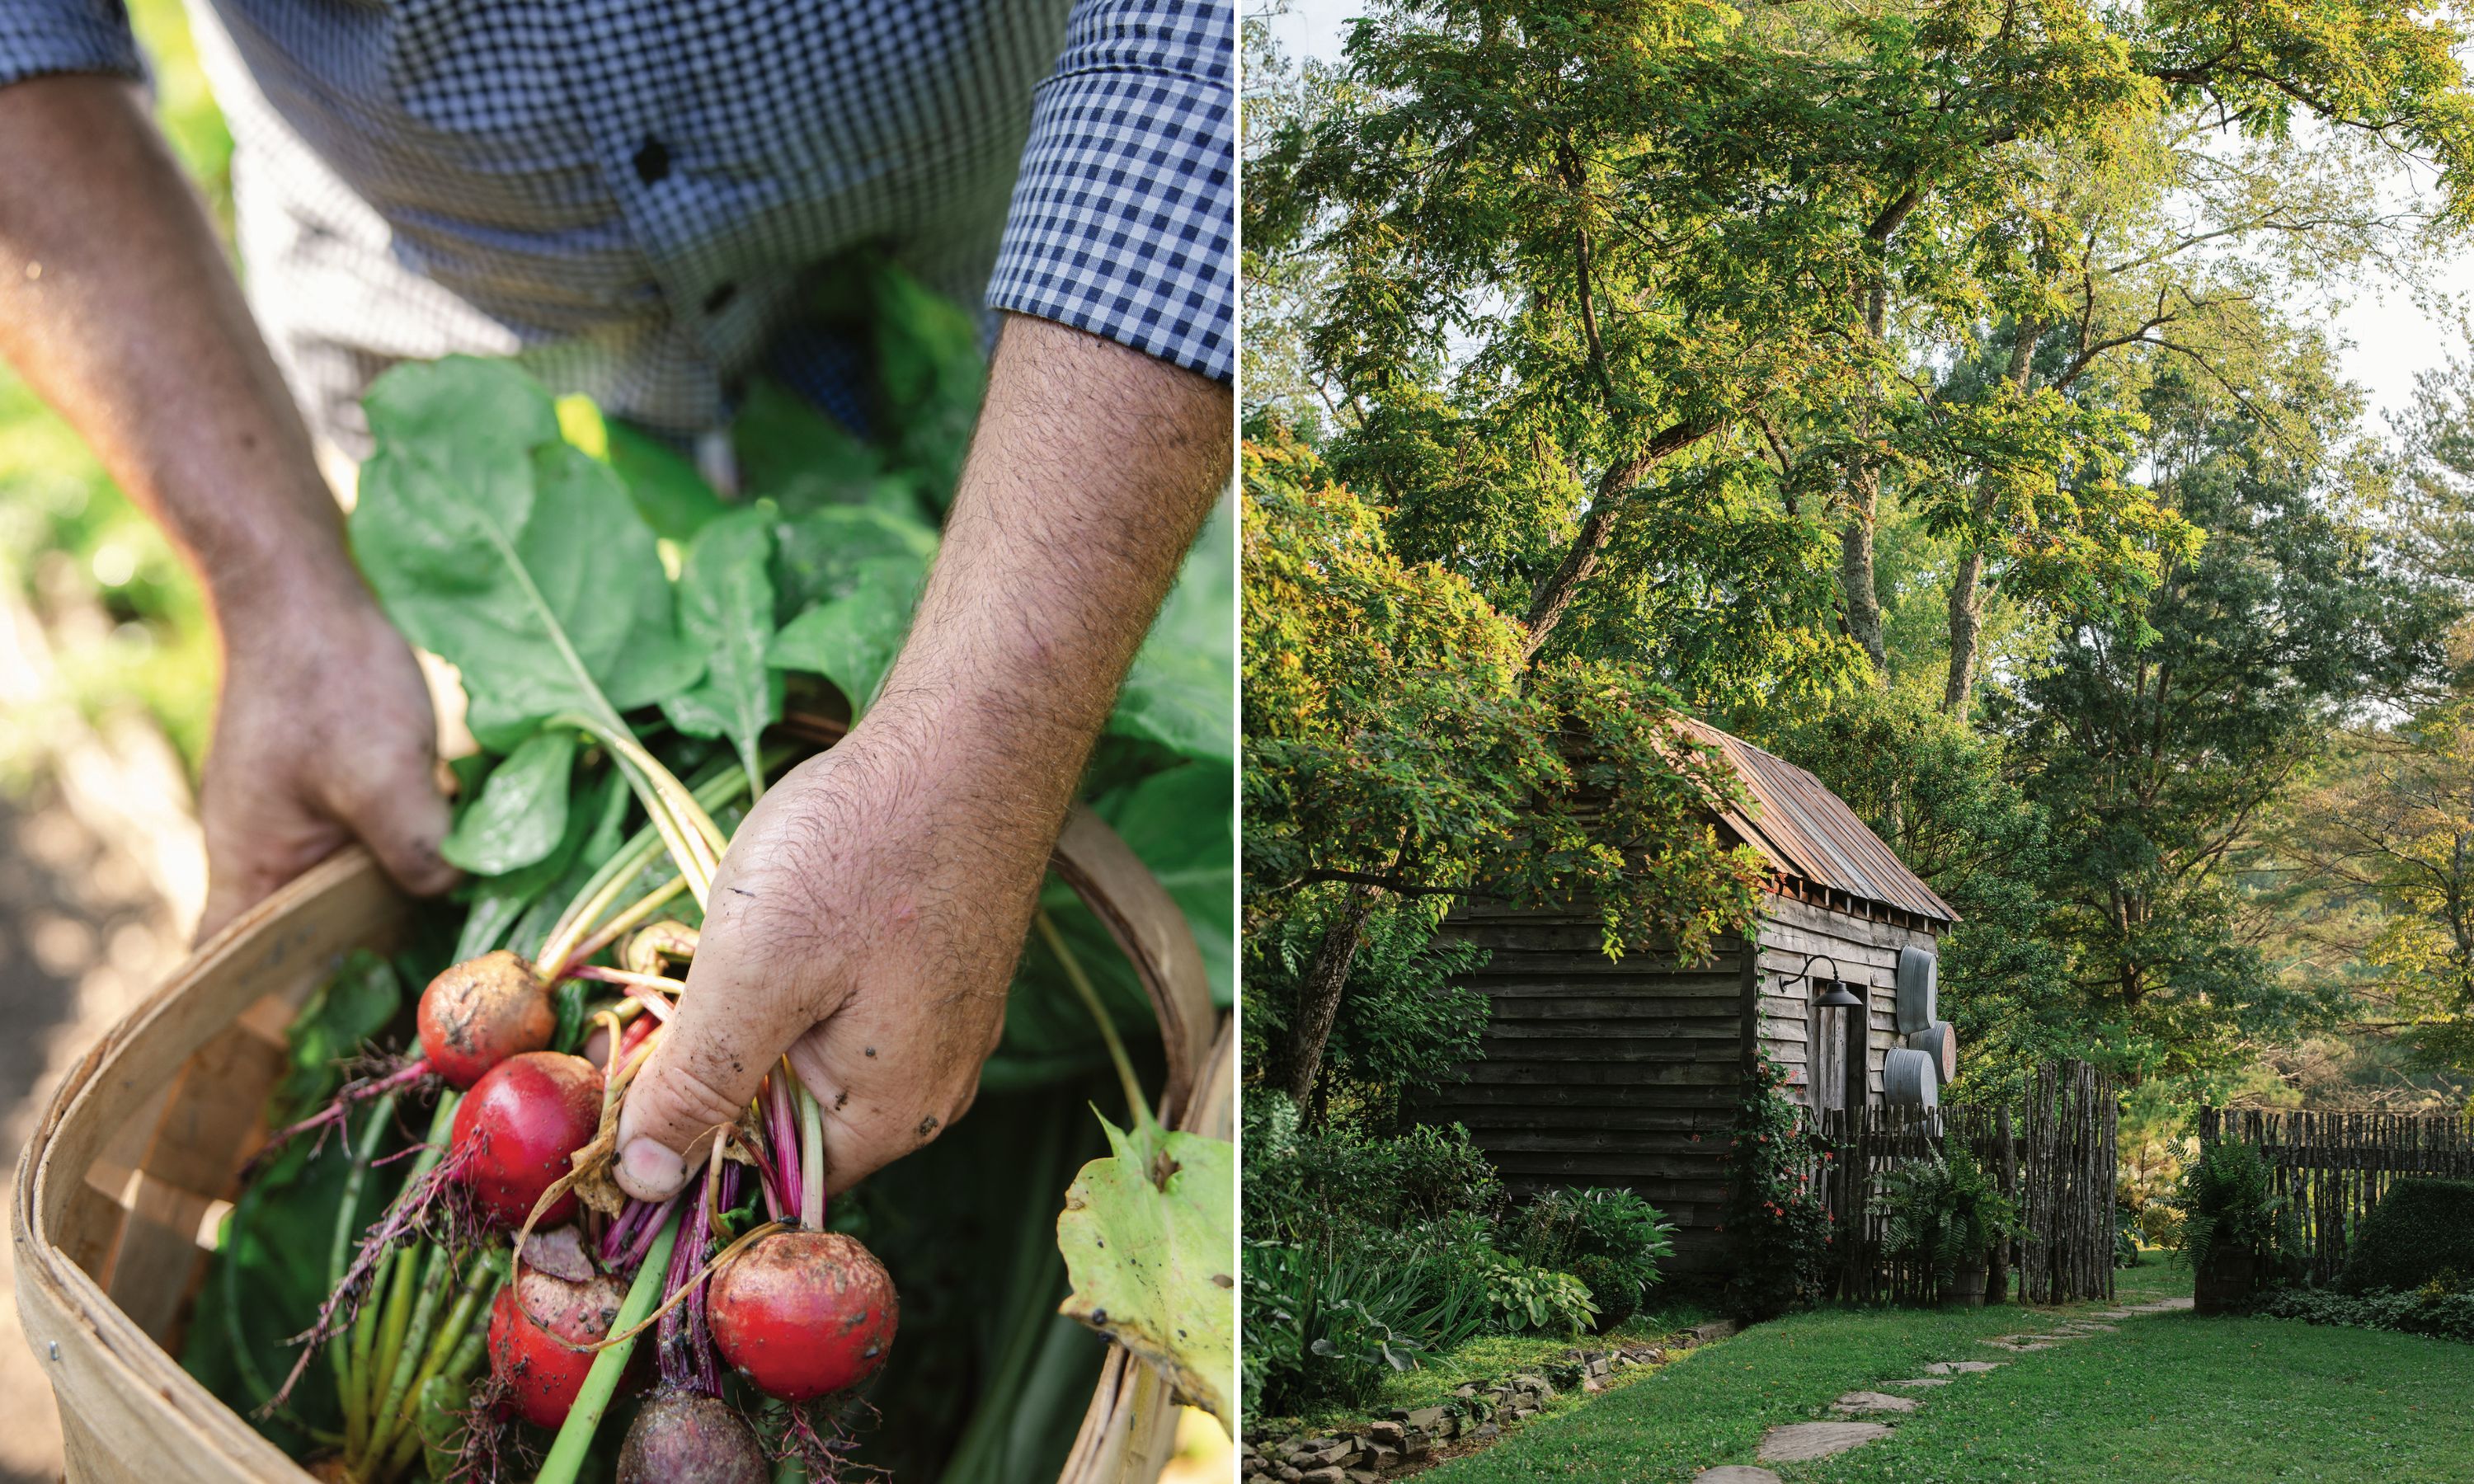 A collage of two images: a hand reaching into a basket to pull out dirty beets; a clapboard shed in a garden with a gate made of sticks.